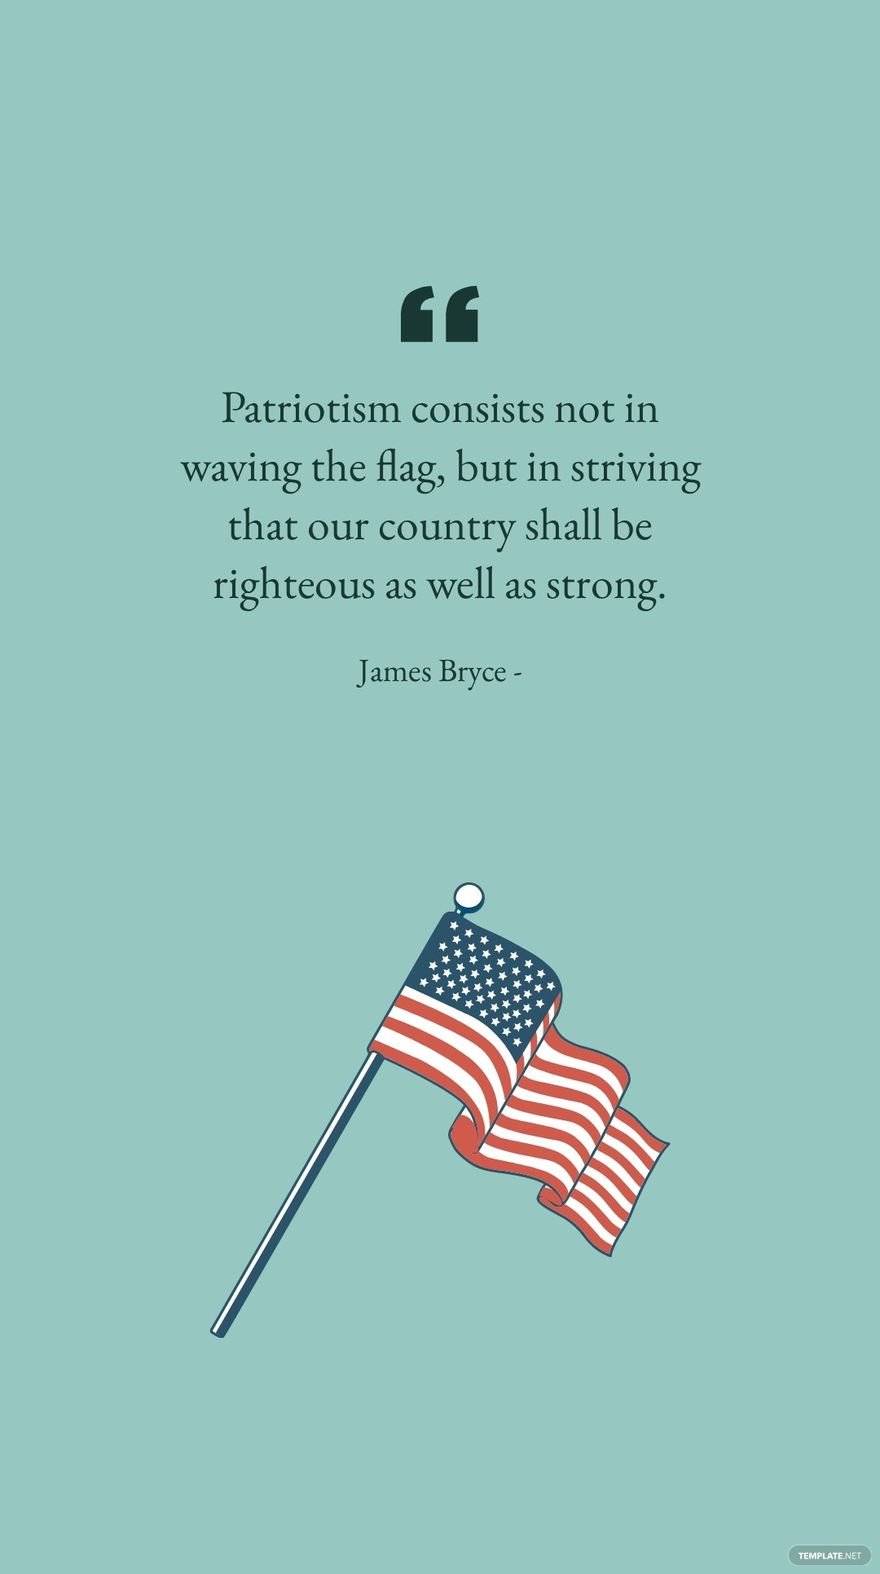 Free James Bryce - Patriotism consists not in waving the flag, but in striving that our country shall be righteous as well as strong.